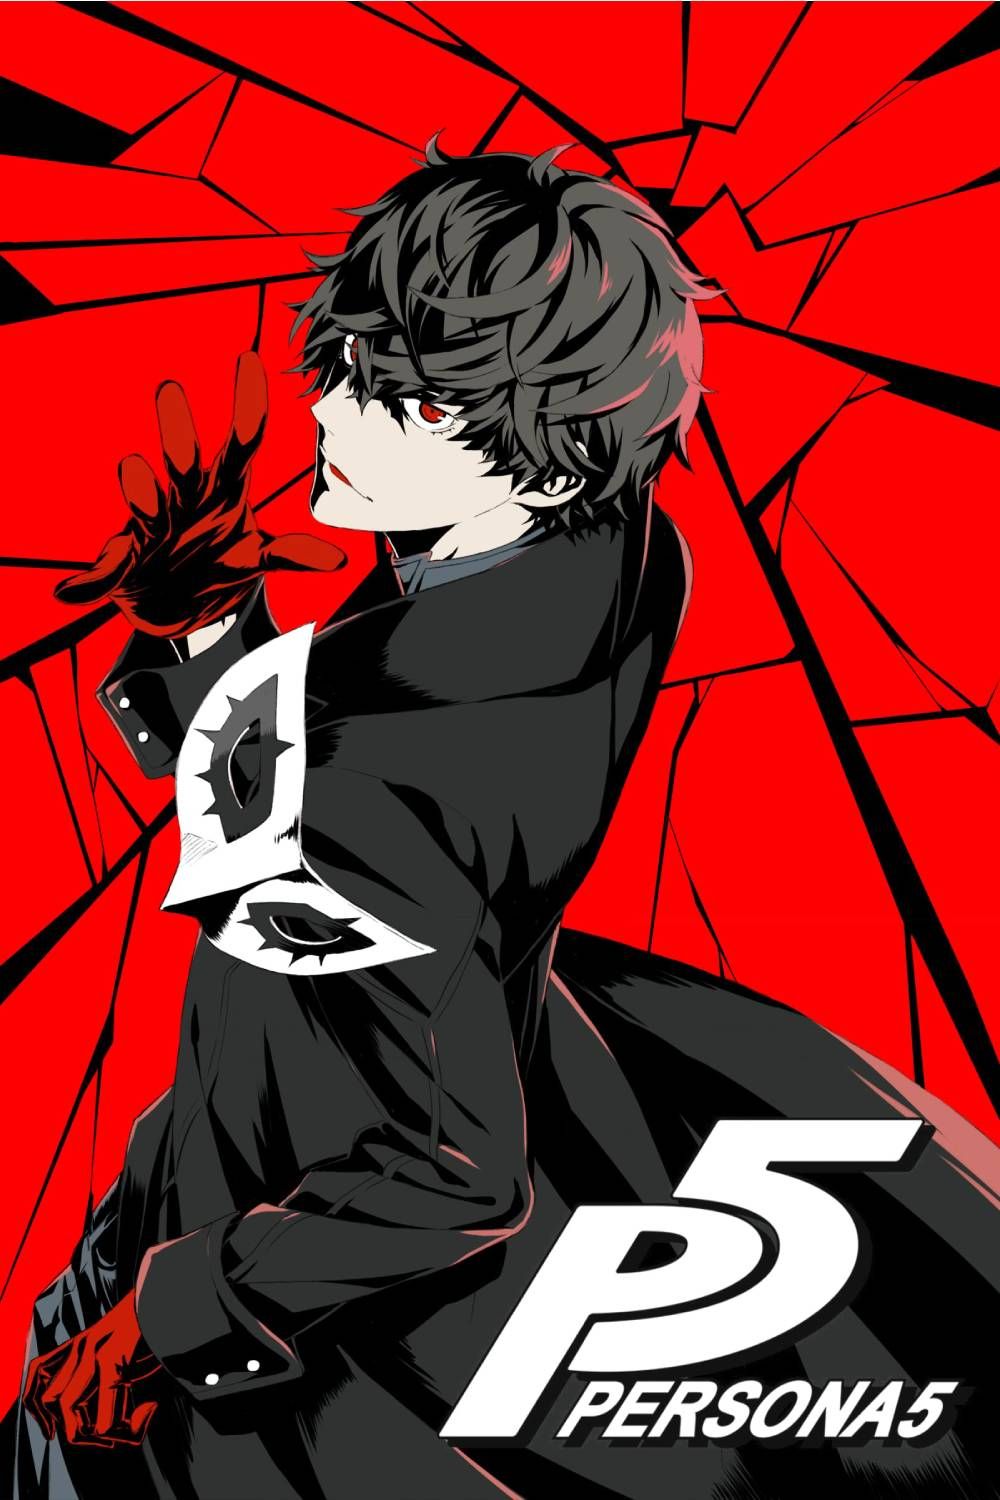 Persona 5: Every Game Ranked, According to Critics